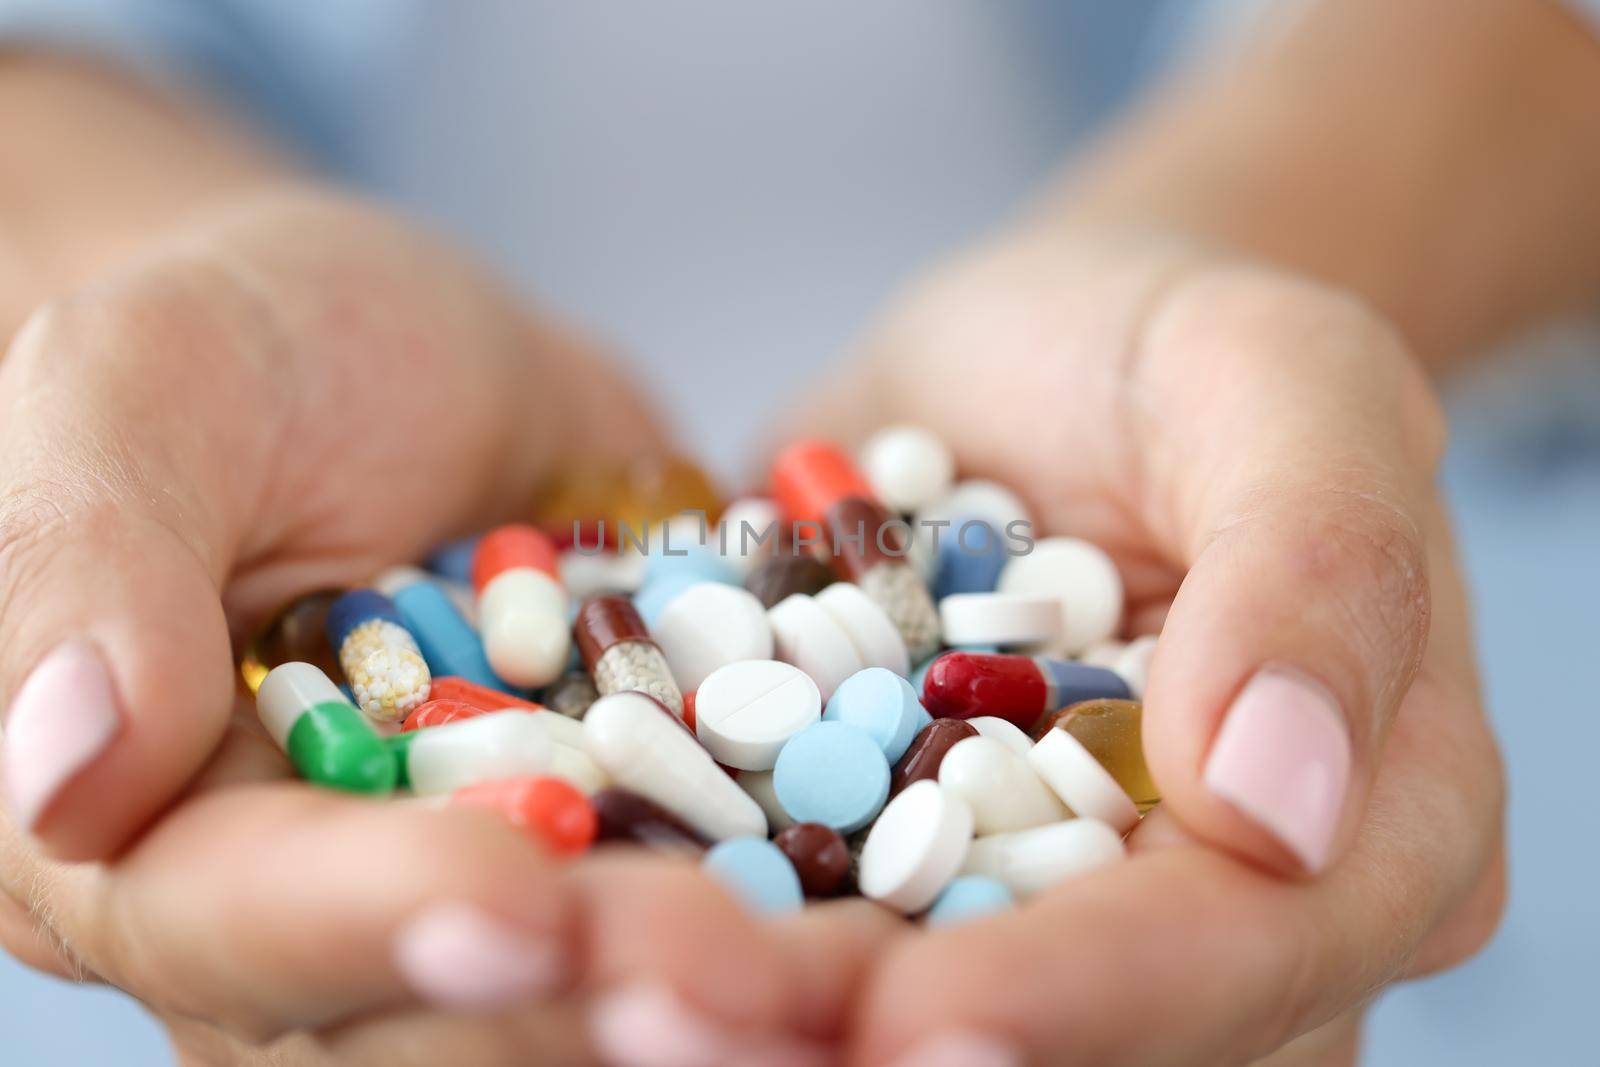 Colored pills and capsules in the palms, close-up. Food supplements, homeopathy. Treatment during a pandemic